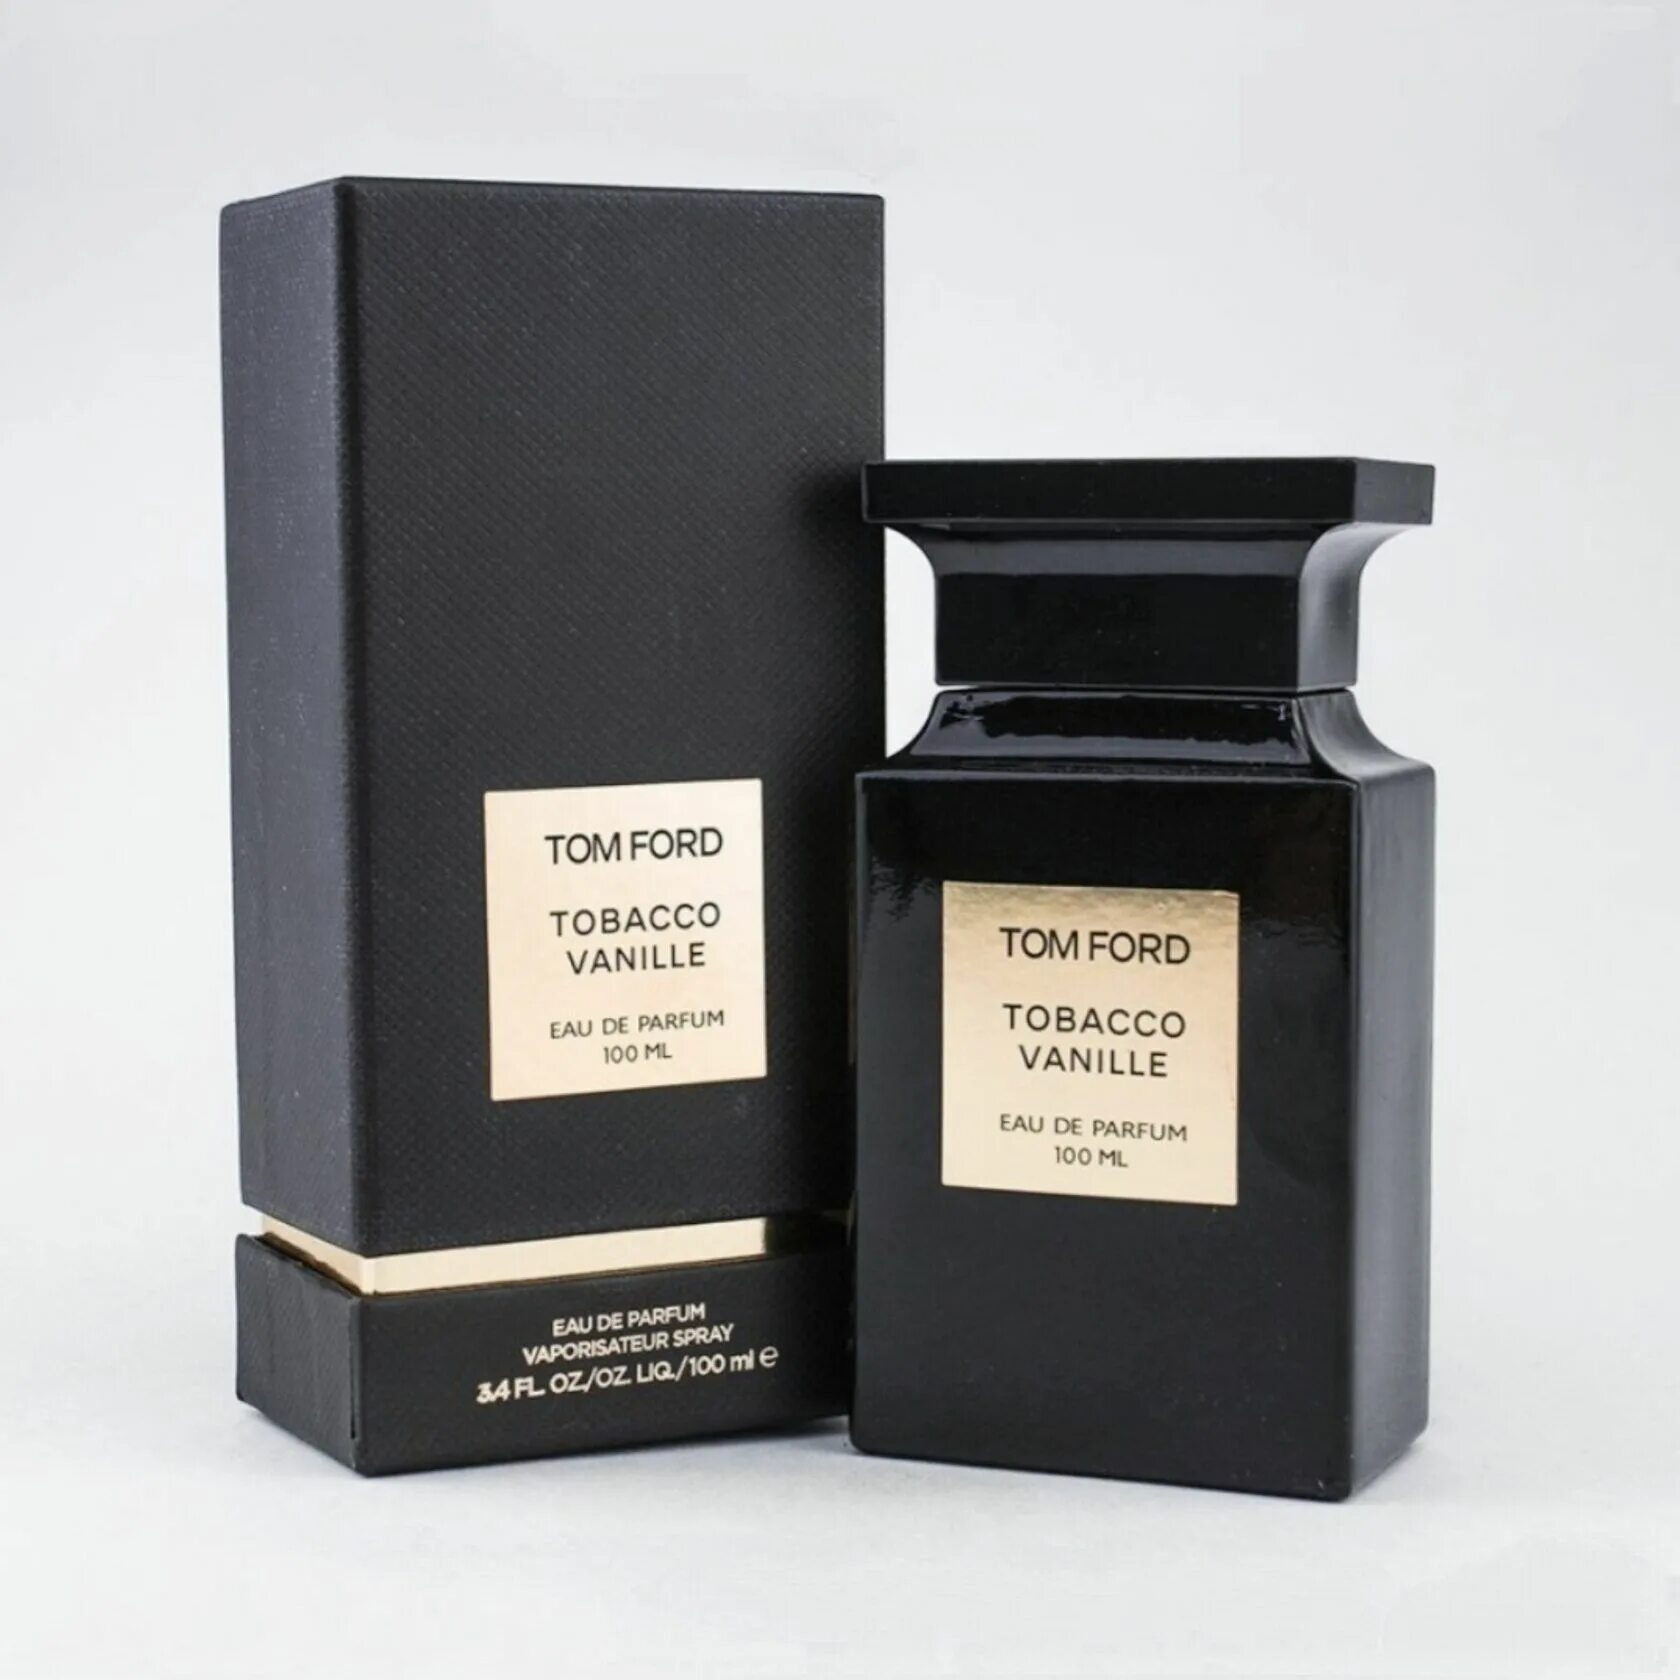 Tom Ford Tobacco Vanille 100ml. Tom Ford Tobacco Vanille. Том Форд табако ваниль 100 мл. Tom Ford Tobacco Vanille, EDP., 100 ml.